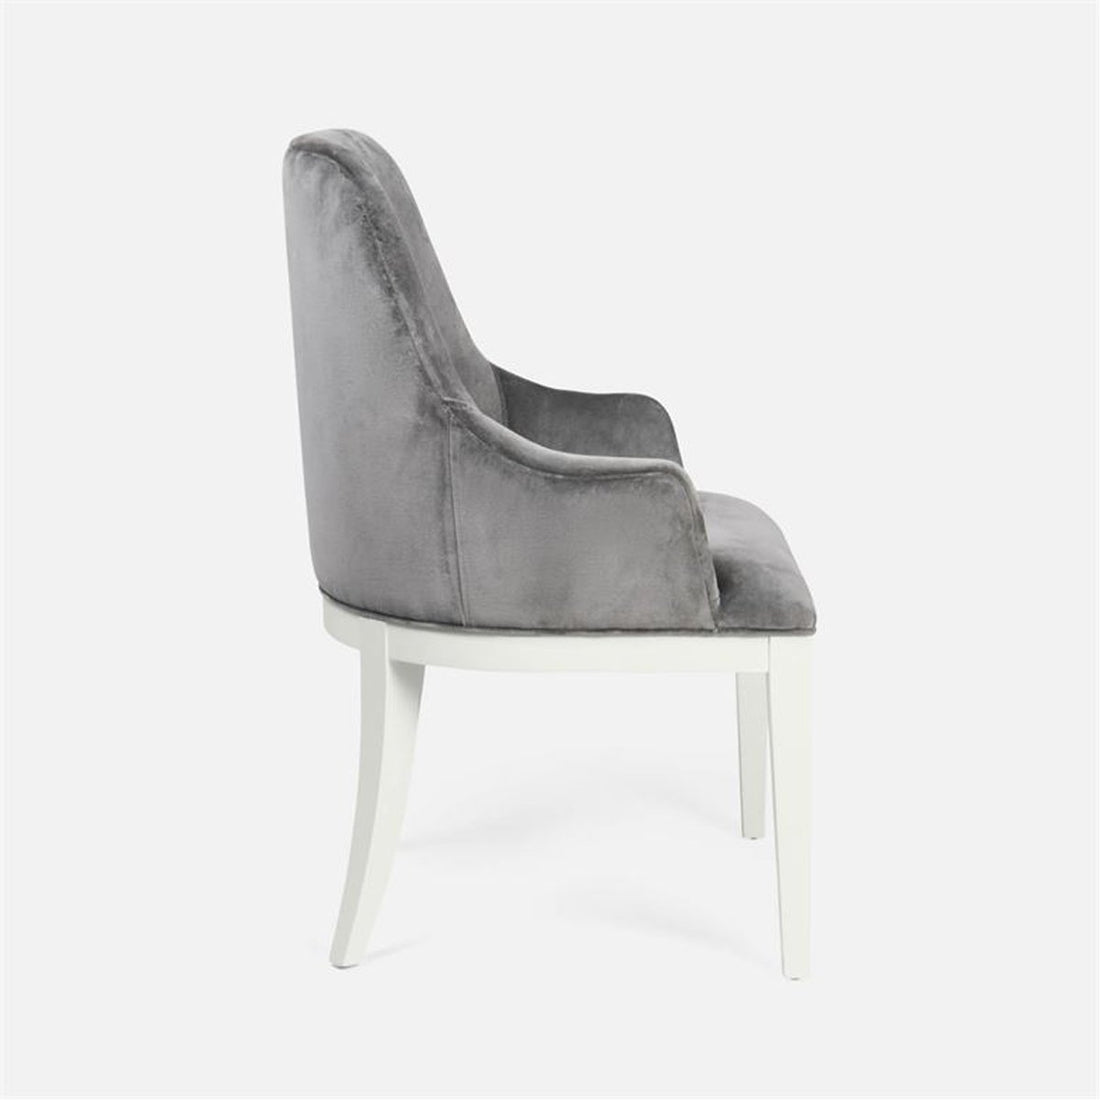 Made Goods Sanderson Dining Armchair in Kern Fabric